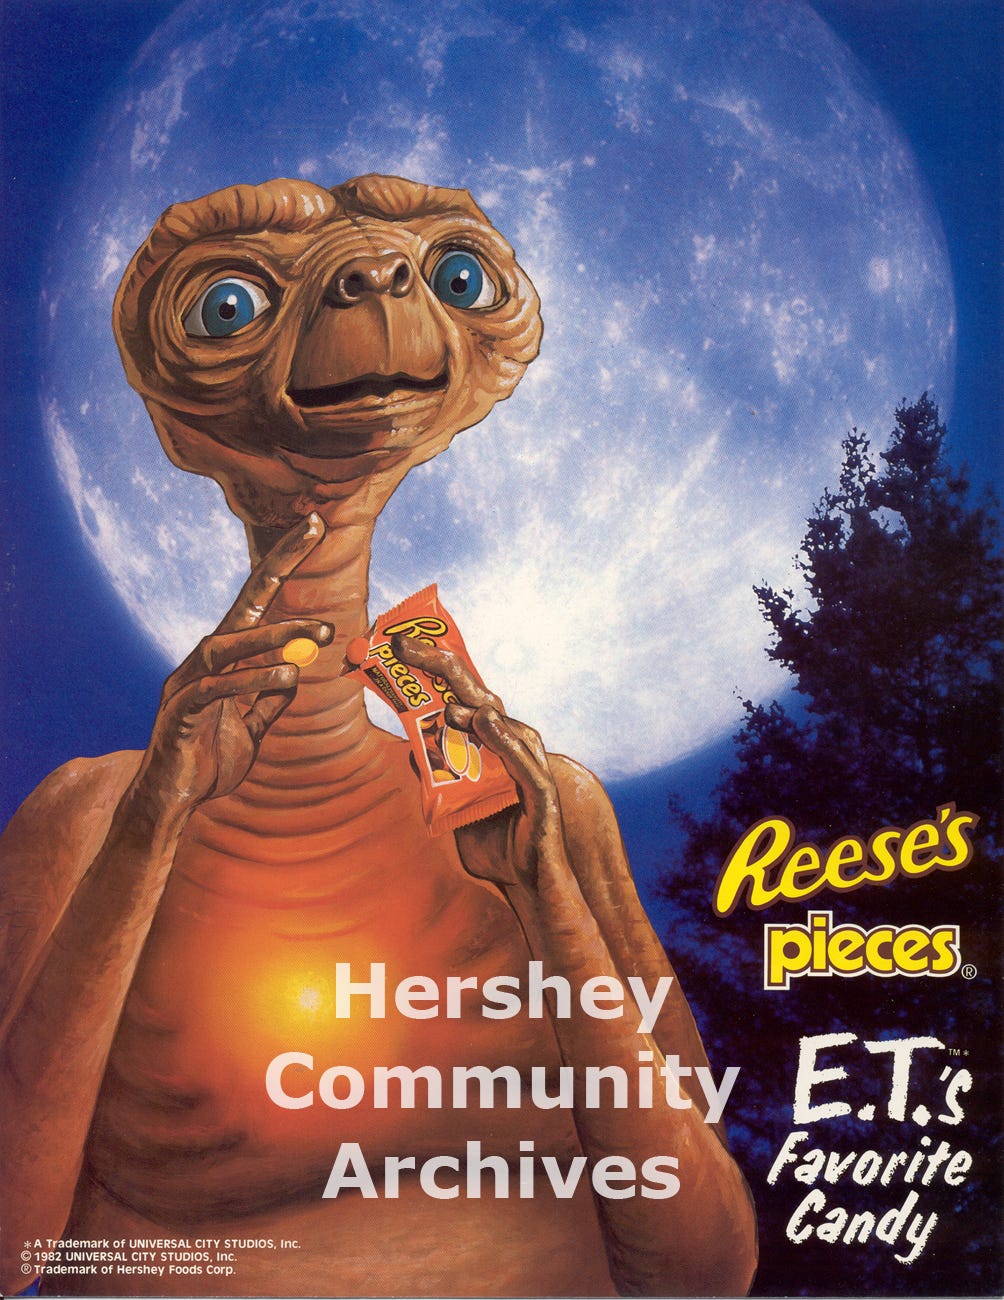 Reese's Pieces: E.T.'s Favorite Candy – Hershey Community Archives